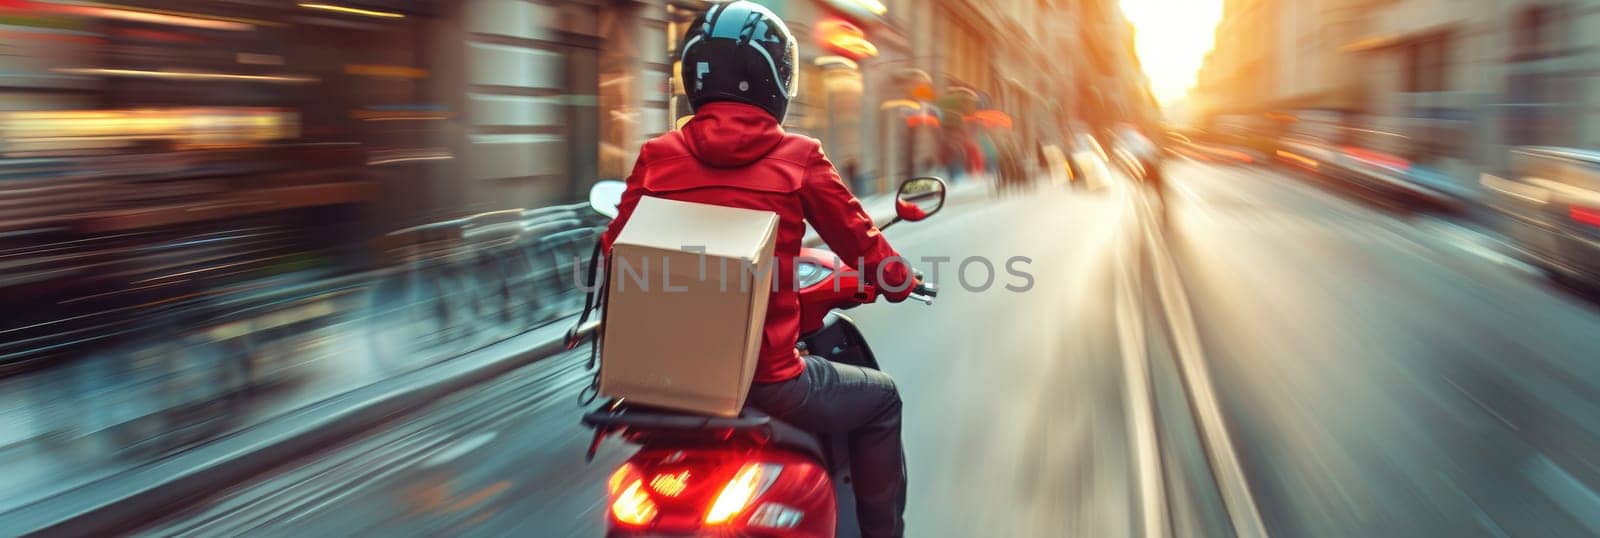 A man on a motorcycle is riding down a street with a box on his back by AI generated image.